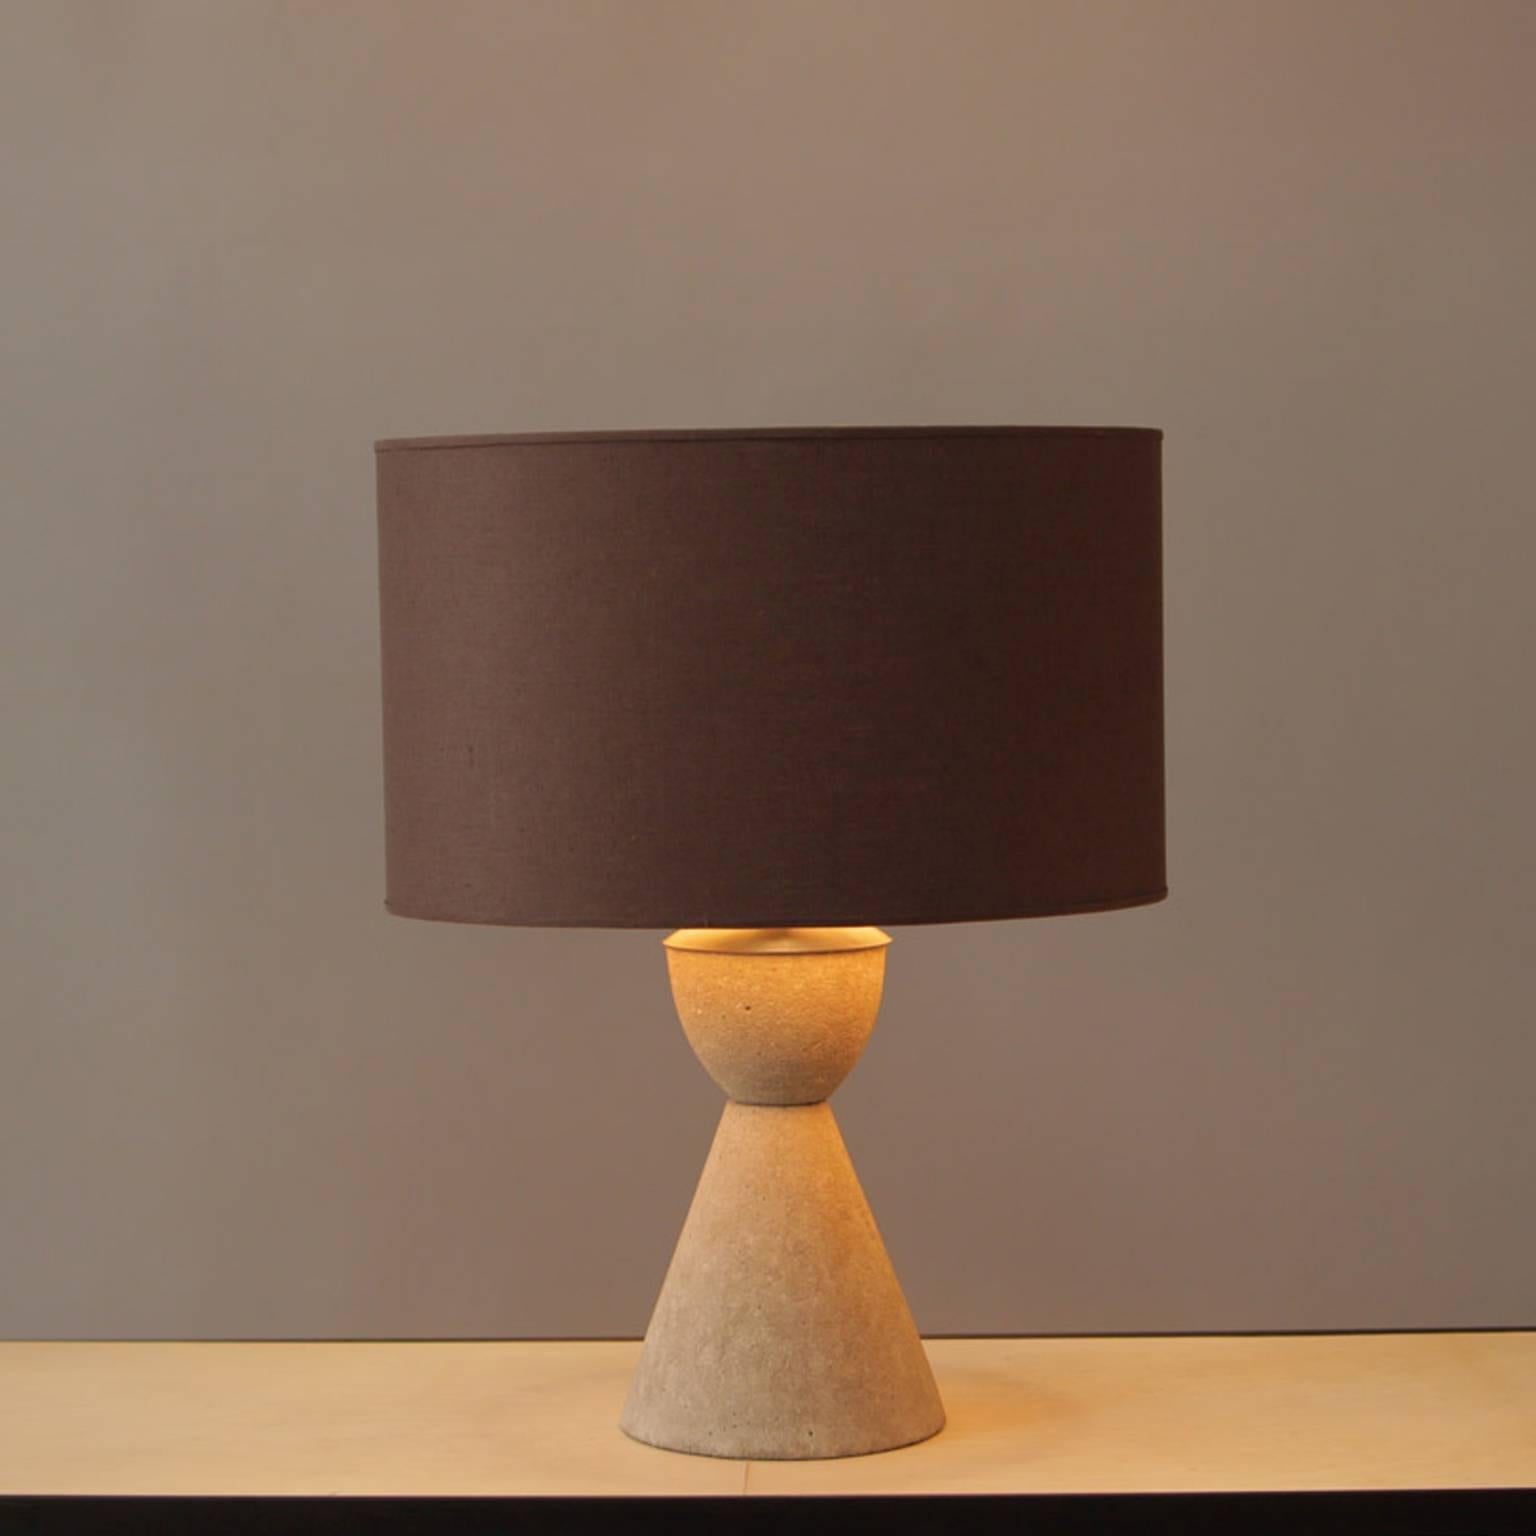 Concrete, steel base and cloth shade
by Joe Rugilio
Measures: 11” H x 8” W. Base shown with custom lampshade
Custom lampshade included
Additional custom sizes and finishes available upon request
Made in New York City by trans-LUXE